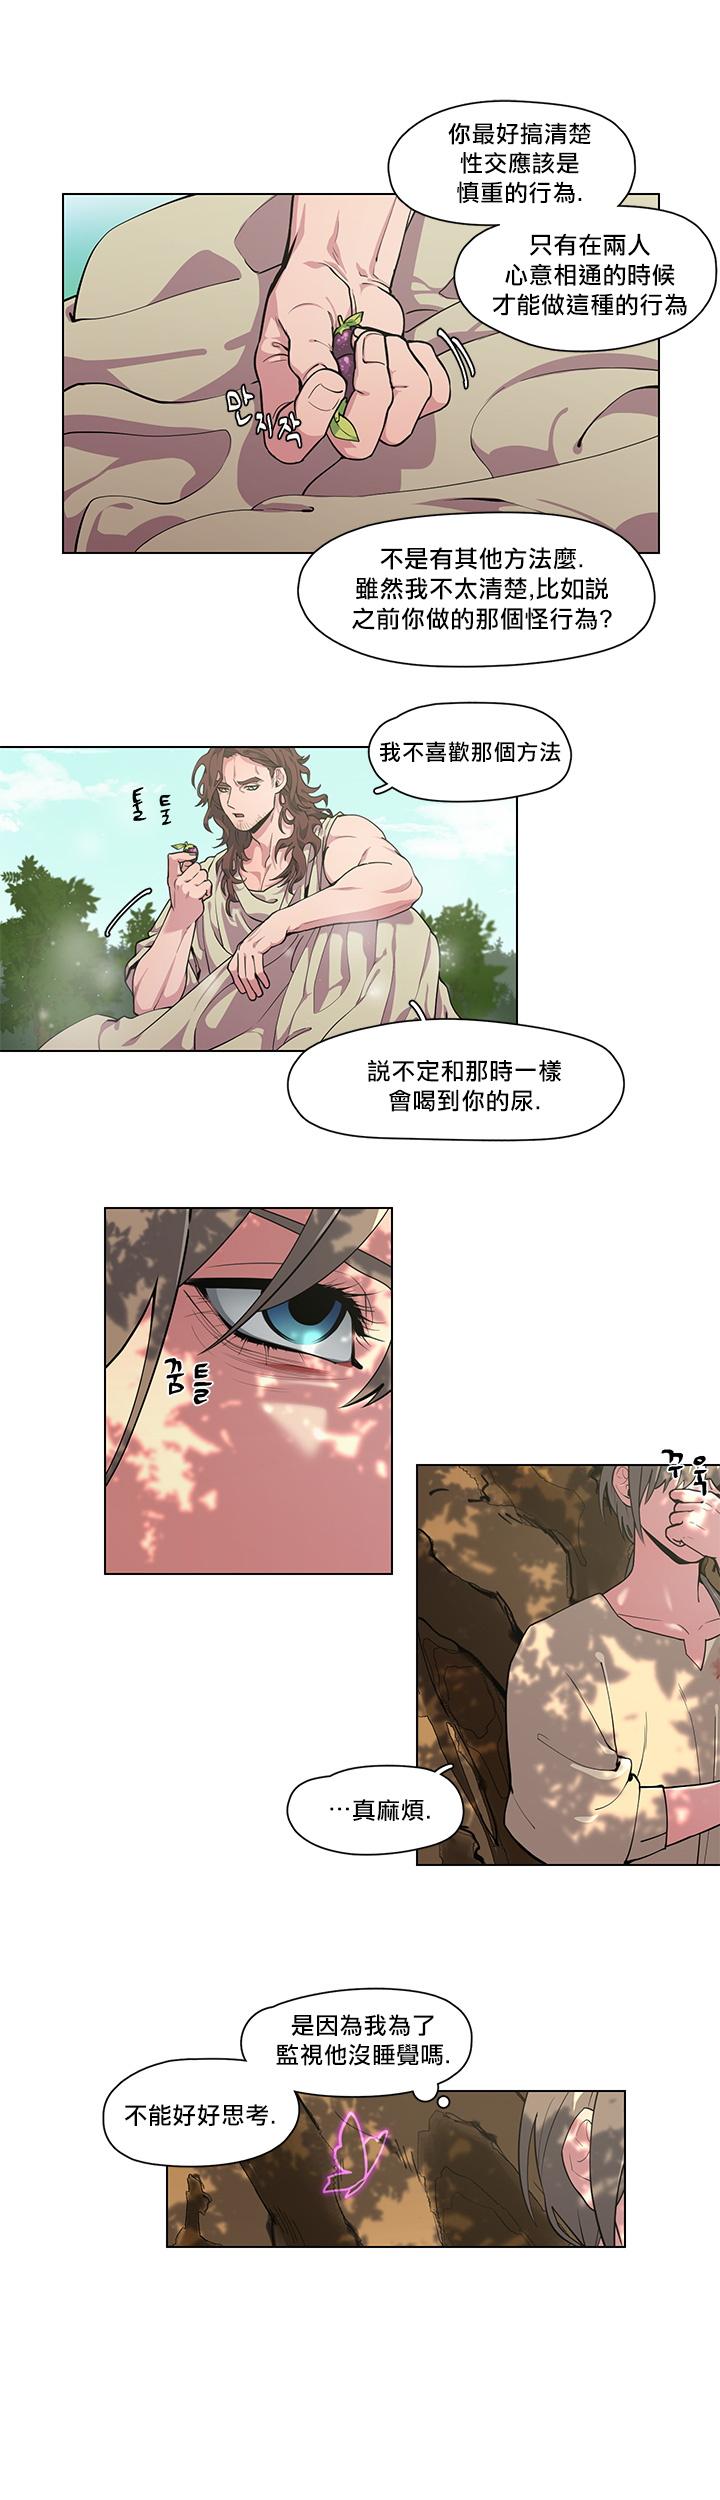 Naked Sluts The Warrior and the Deity | 勇者与山神 Ch. 2-4 Blows - Page 9